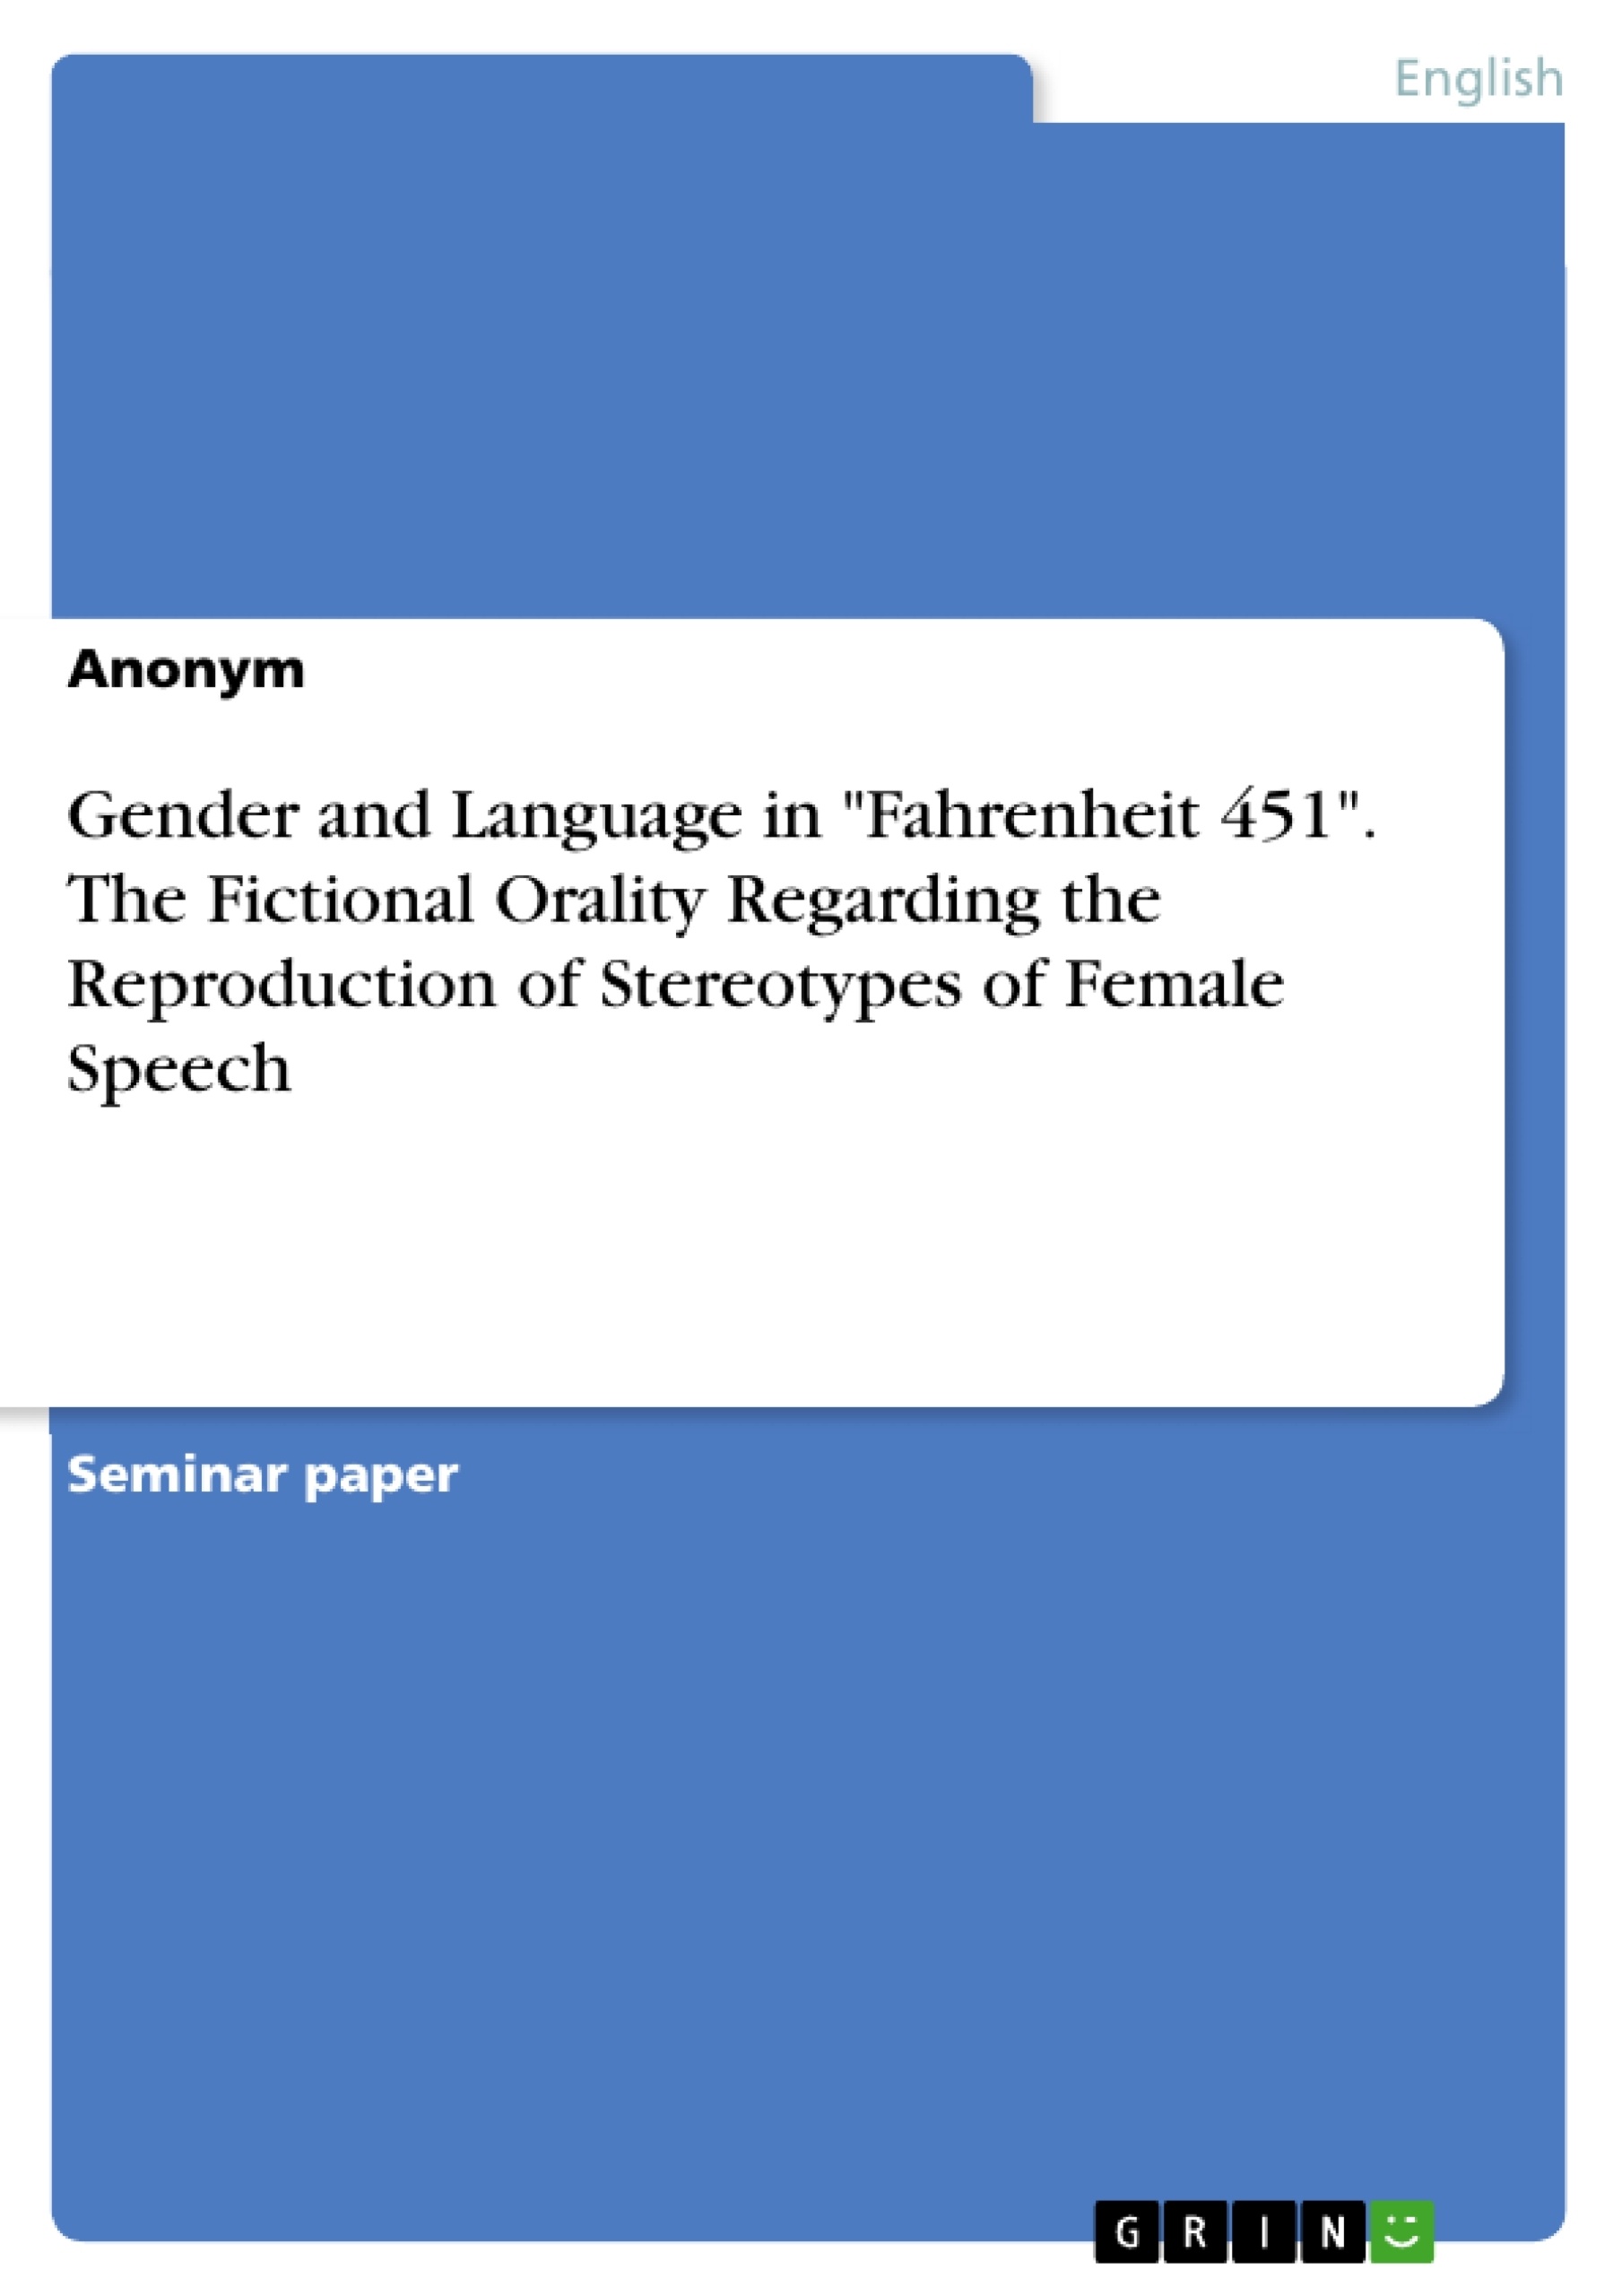 Titre: Gender and Language in "Fahrenheit 451". The Fictional Orality Regarding the Reproduction of Stereotypes of Female Speech